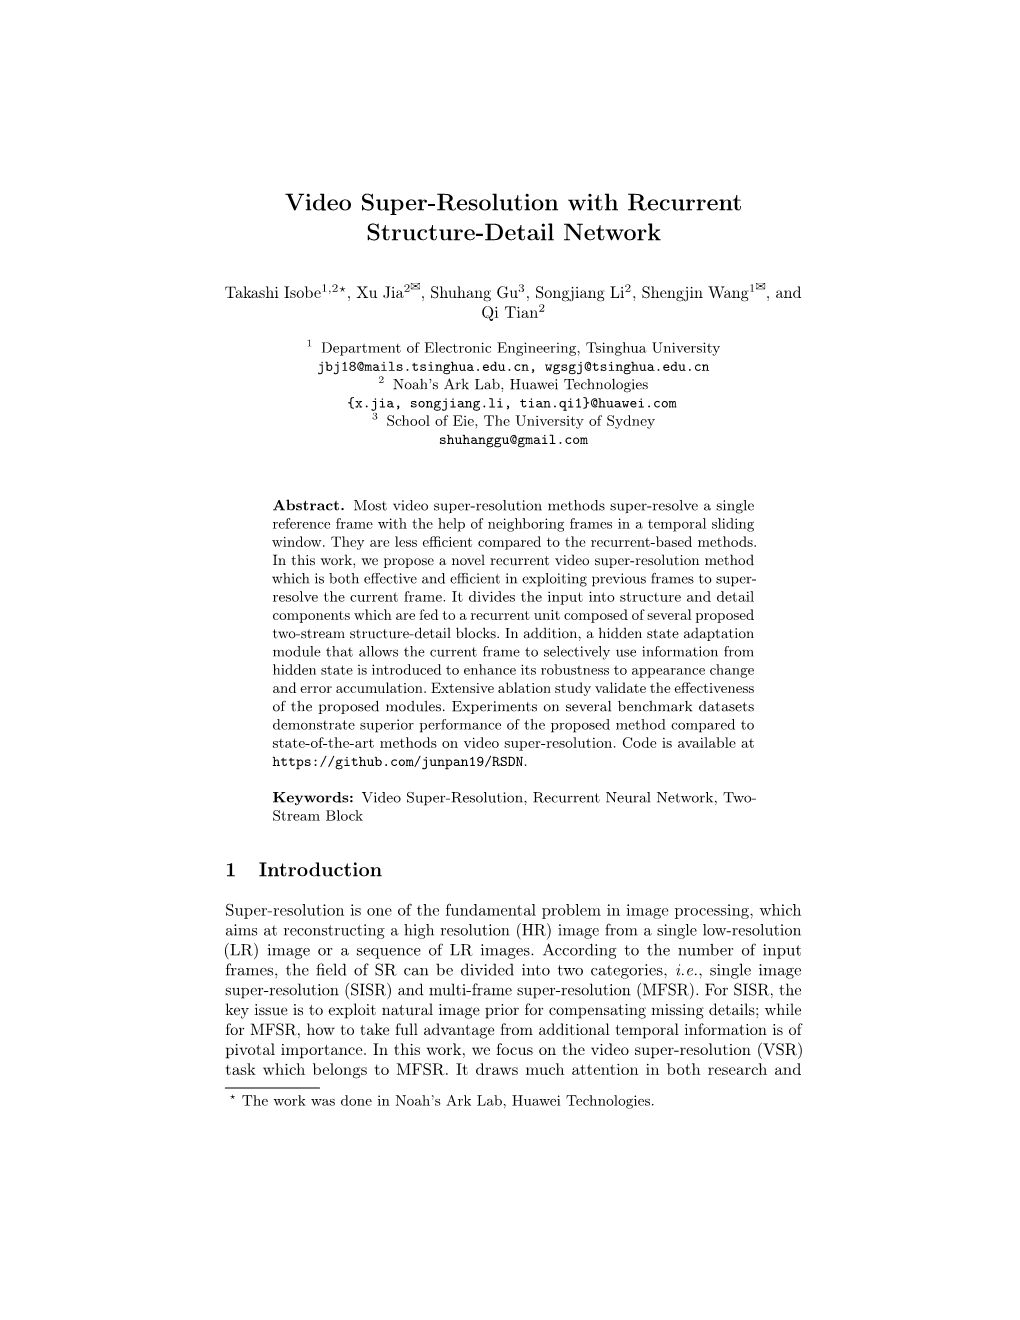 Video Super-Resolution with Recurrent Structure-Detail Network